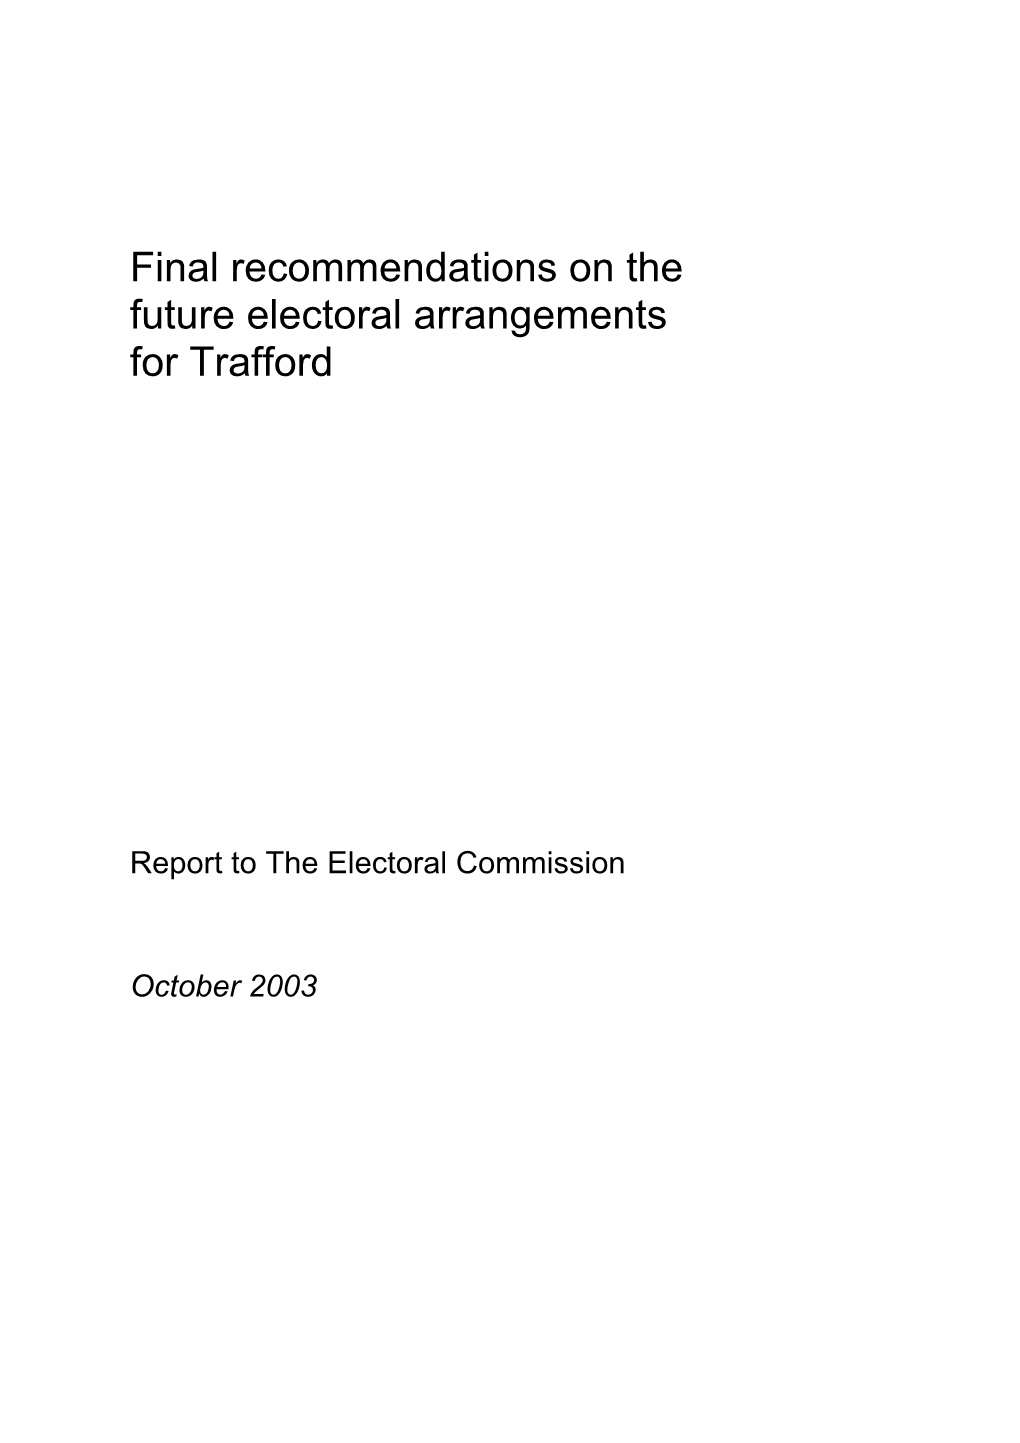 Final Recommendations on the Future Electoral Arrangements for Trafford